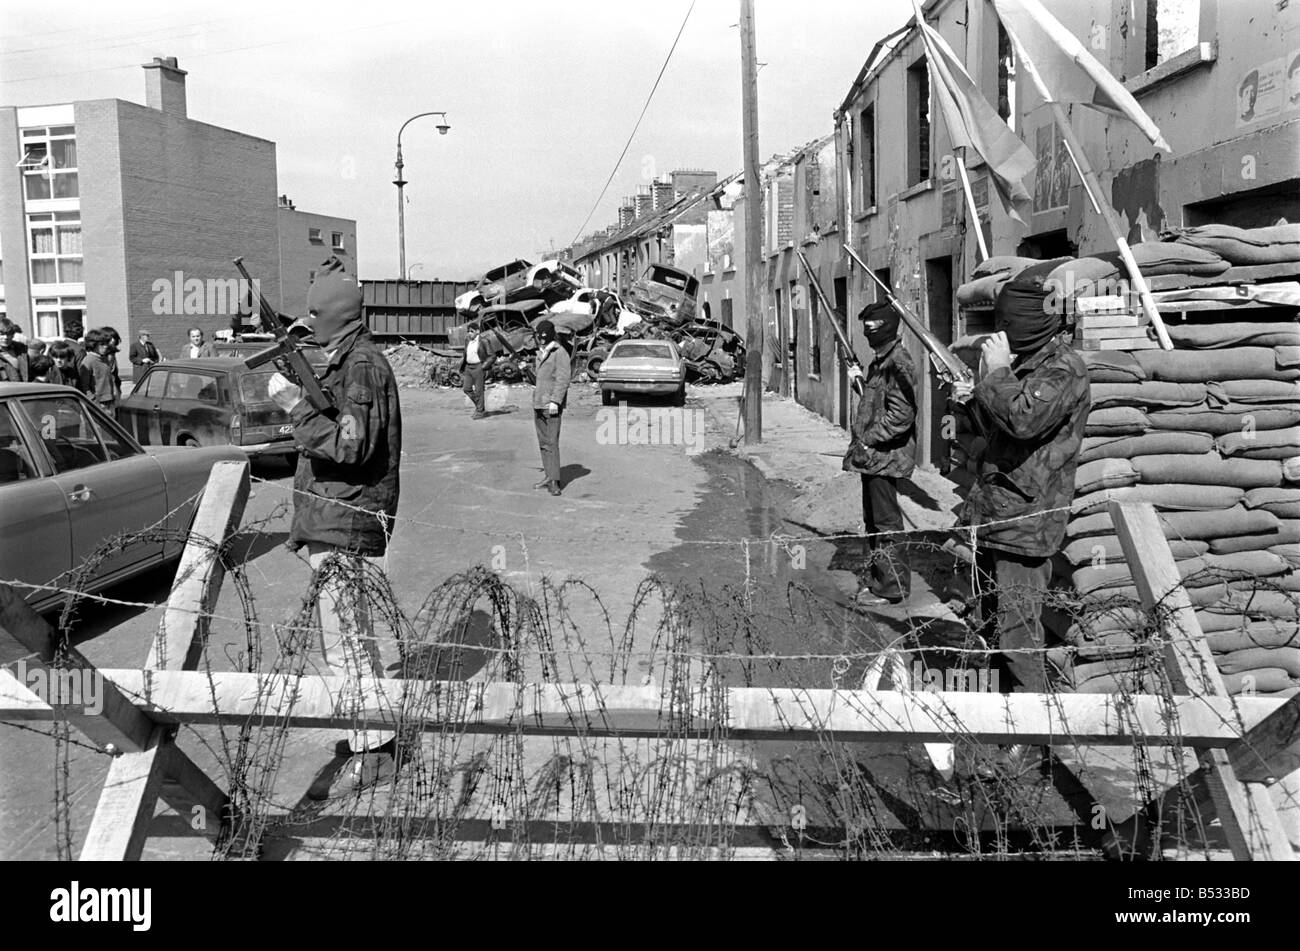 Northern Ireland April 1972. Members of the official IRA seen manning a barricade in the Bogside. April 1972 72-4762 Stock Photo